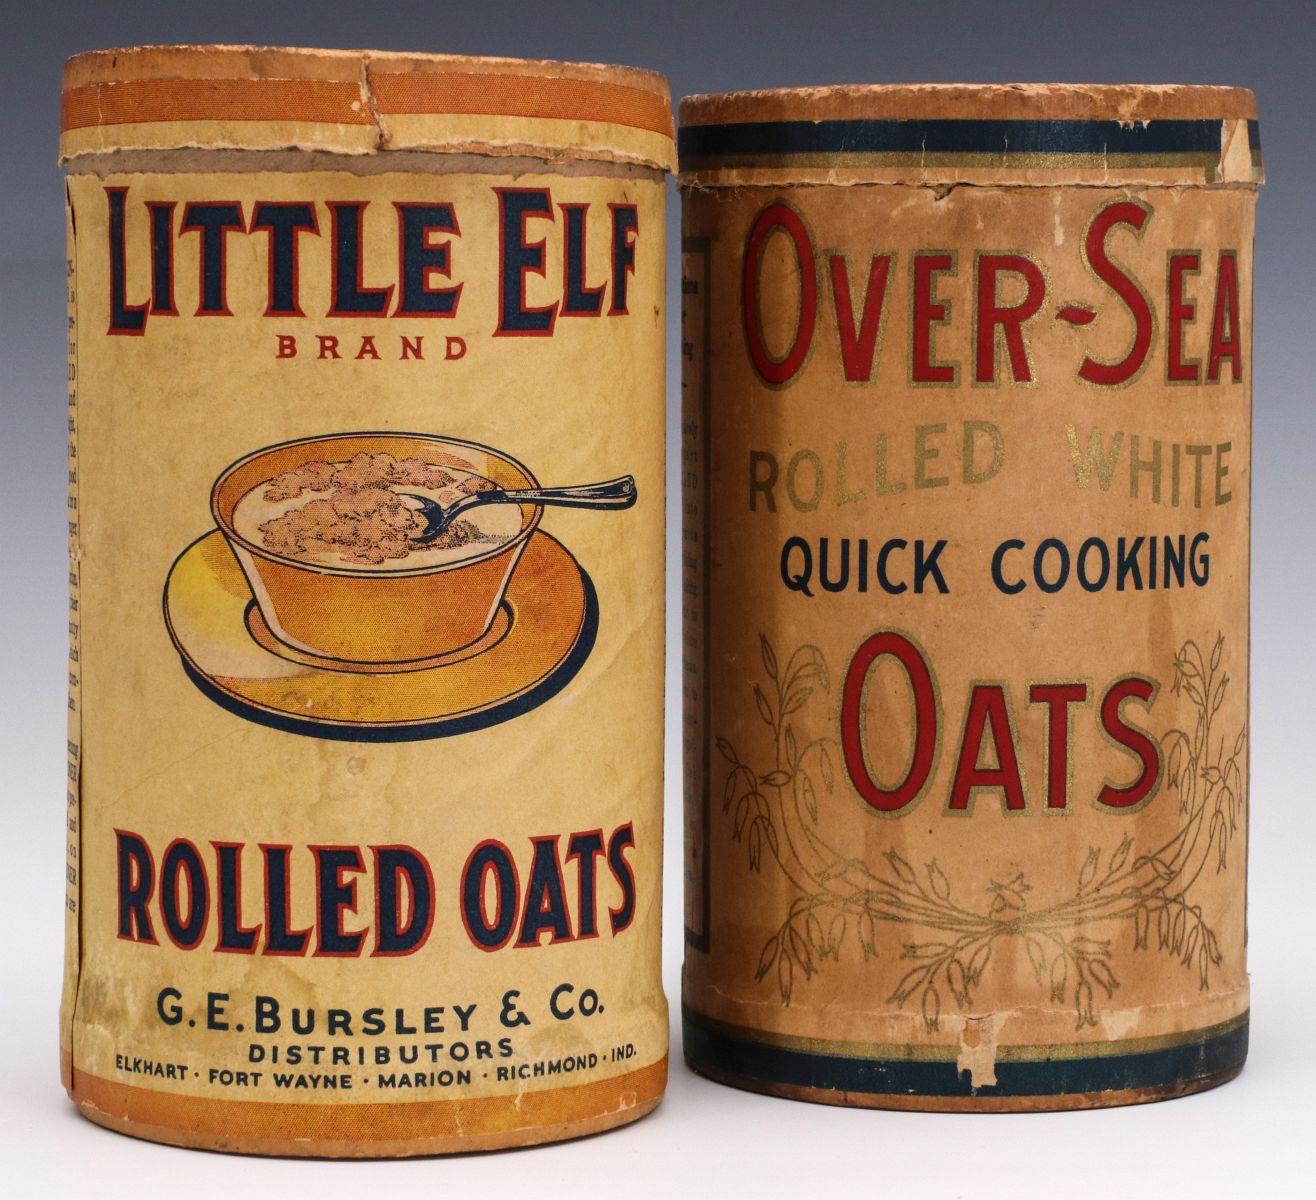 'LITTLE ELF' AND 'OVER-SEA' ROLLED OATS CONTAINERS